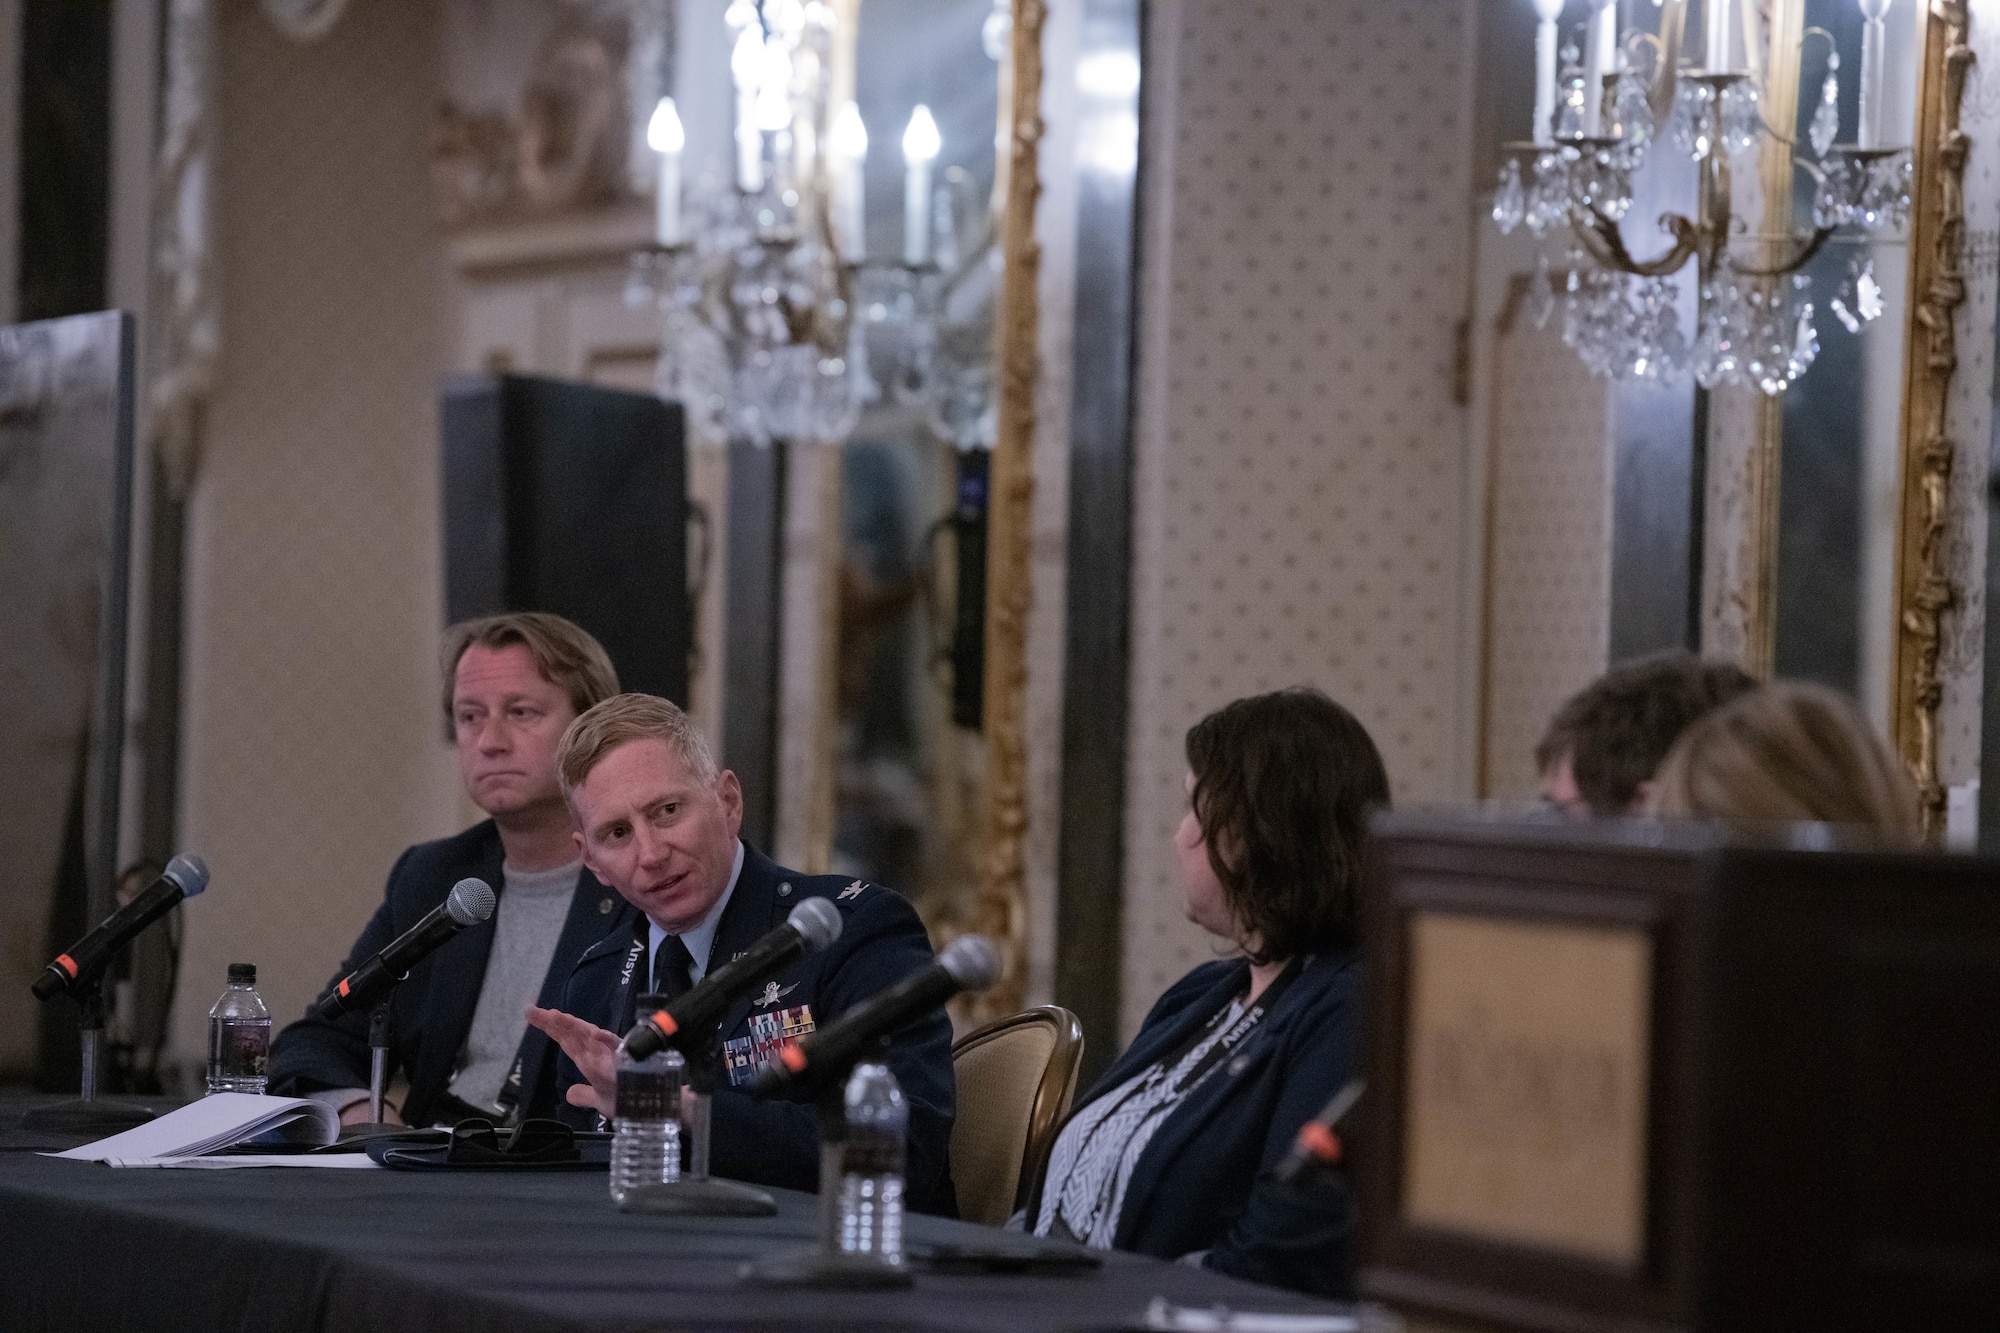 U.S. Space Force Col. Christopher A. Kennedy, Space Delta 6 - Space Access and Cyberspace Operations commander, engaging with fellow panel members.